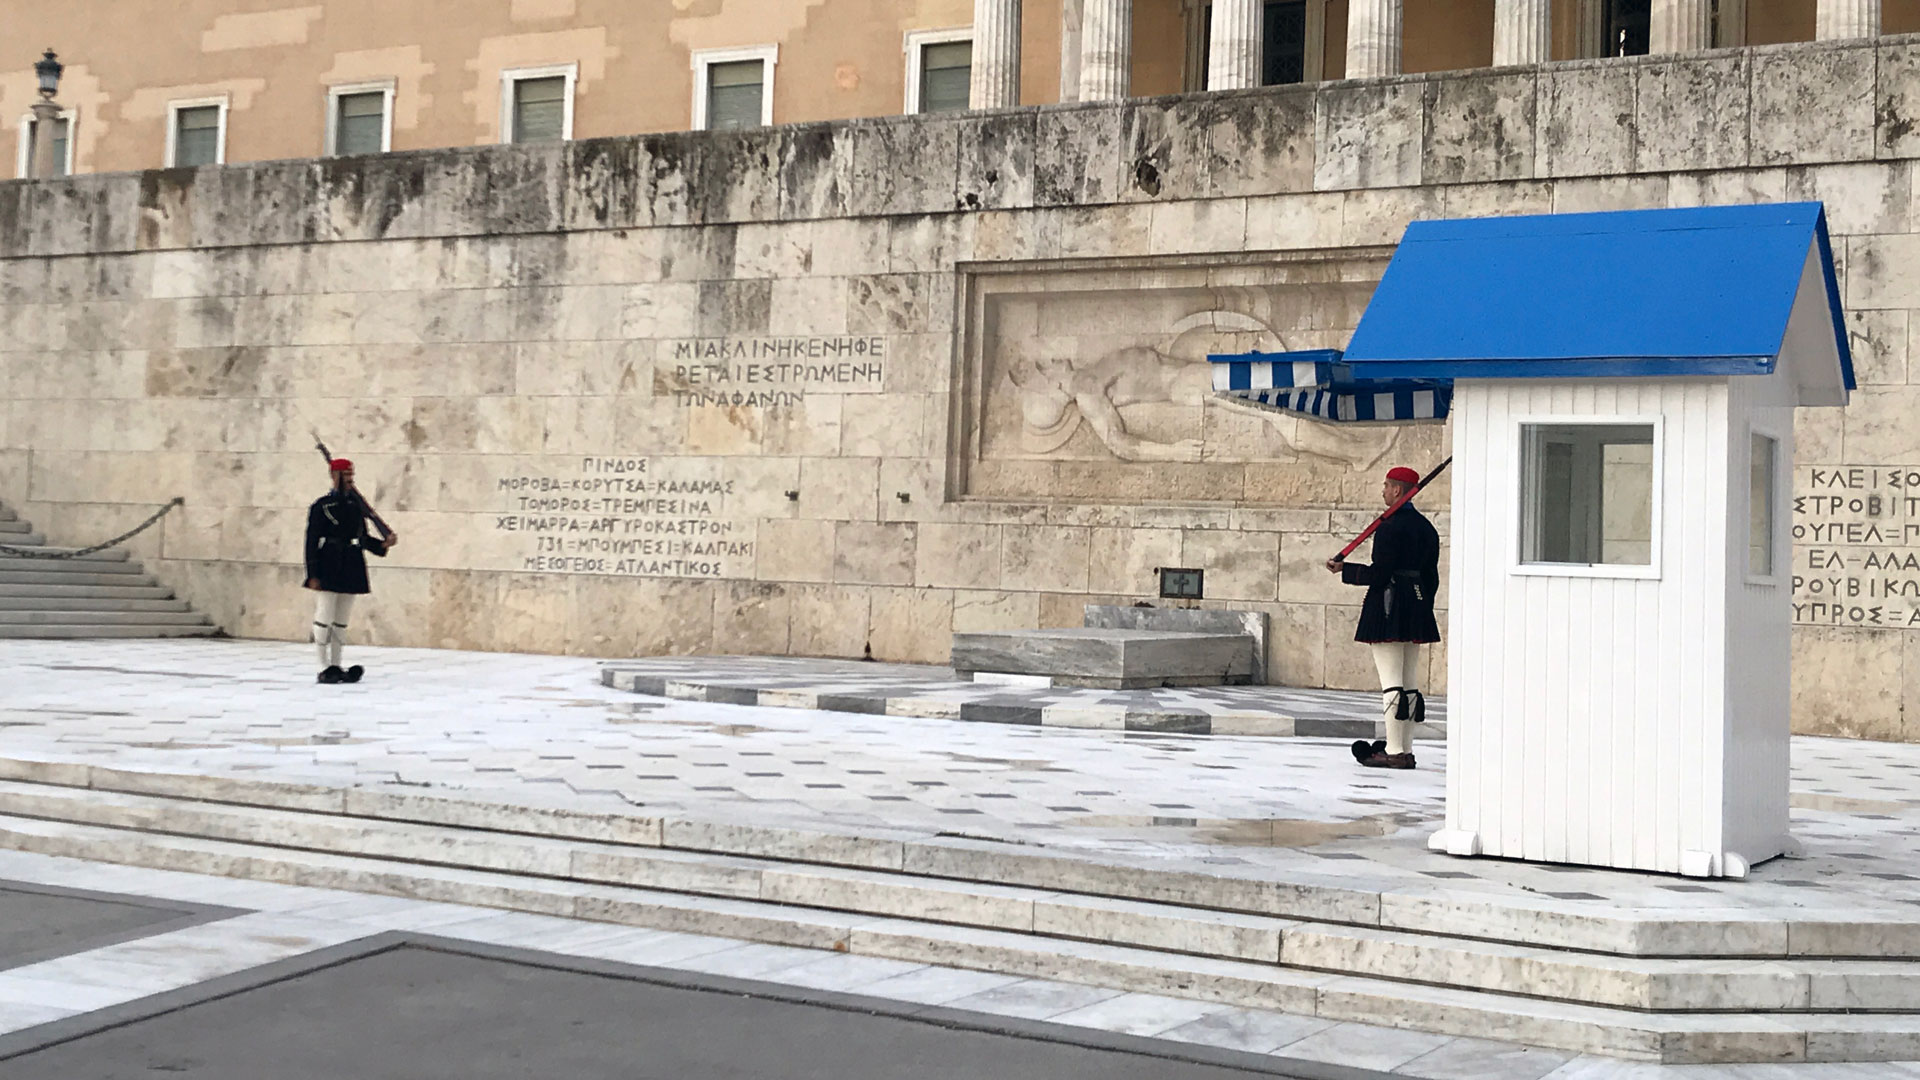 Changing of the Guard ceremony at the Tomb of the Unknown Soldier in Athens.